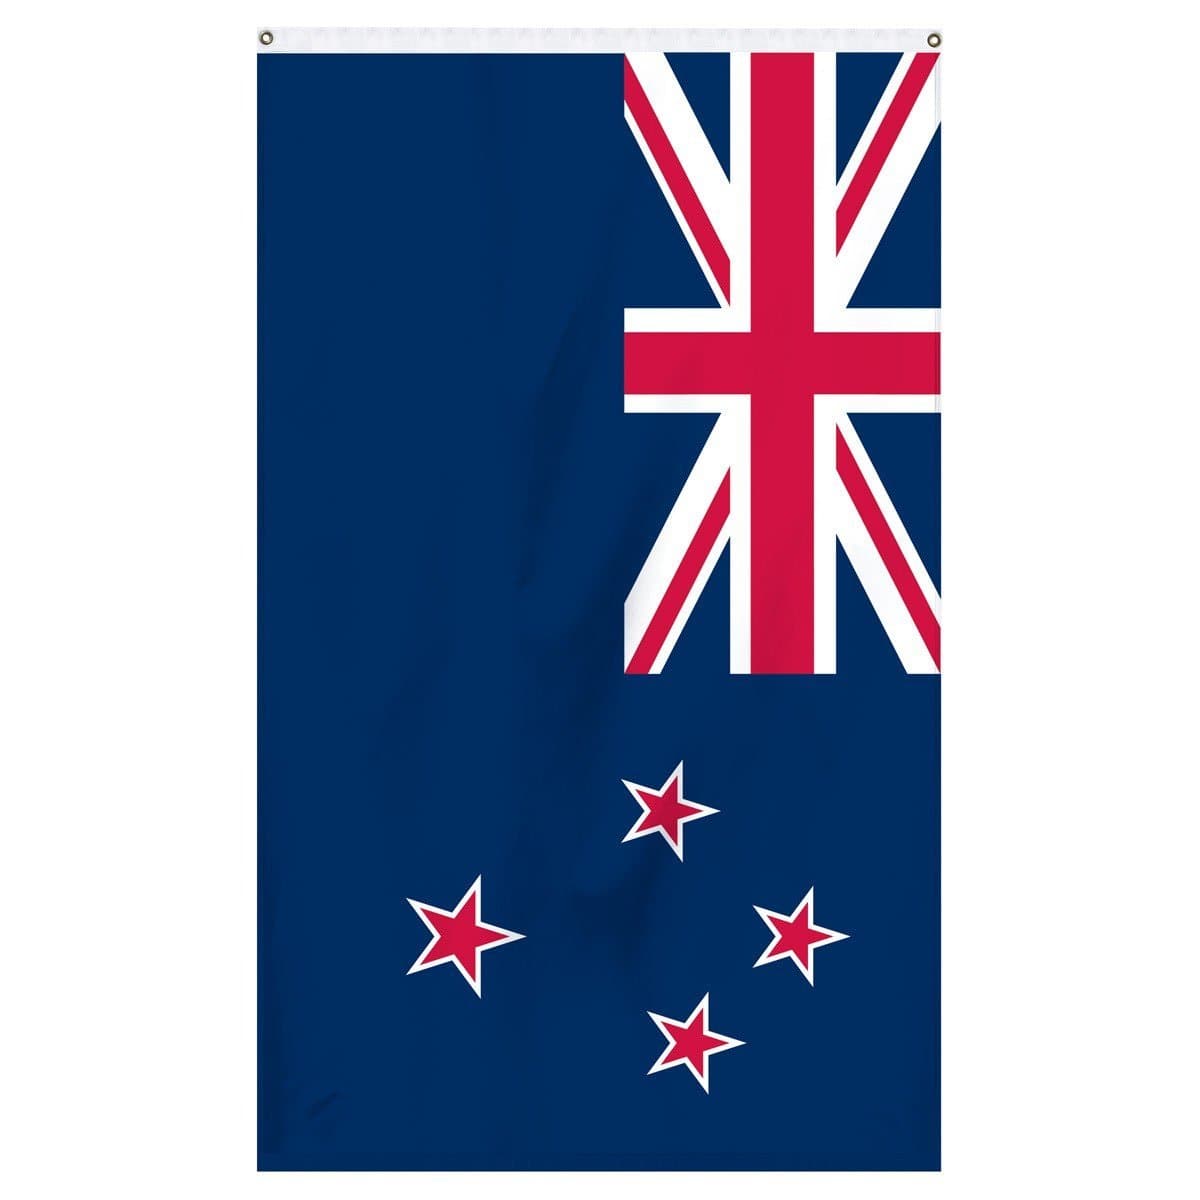 New Zealand national flag for sale to buy online